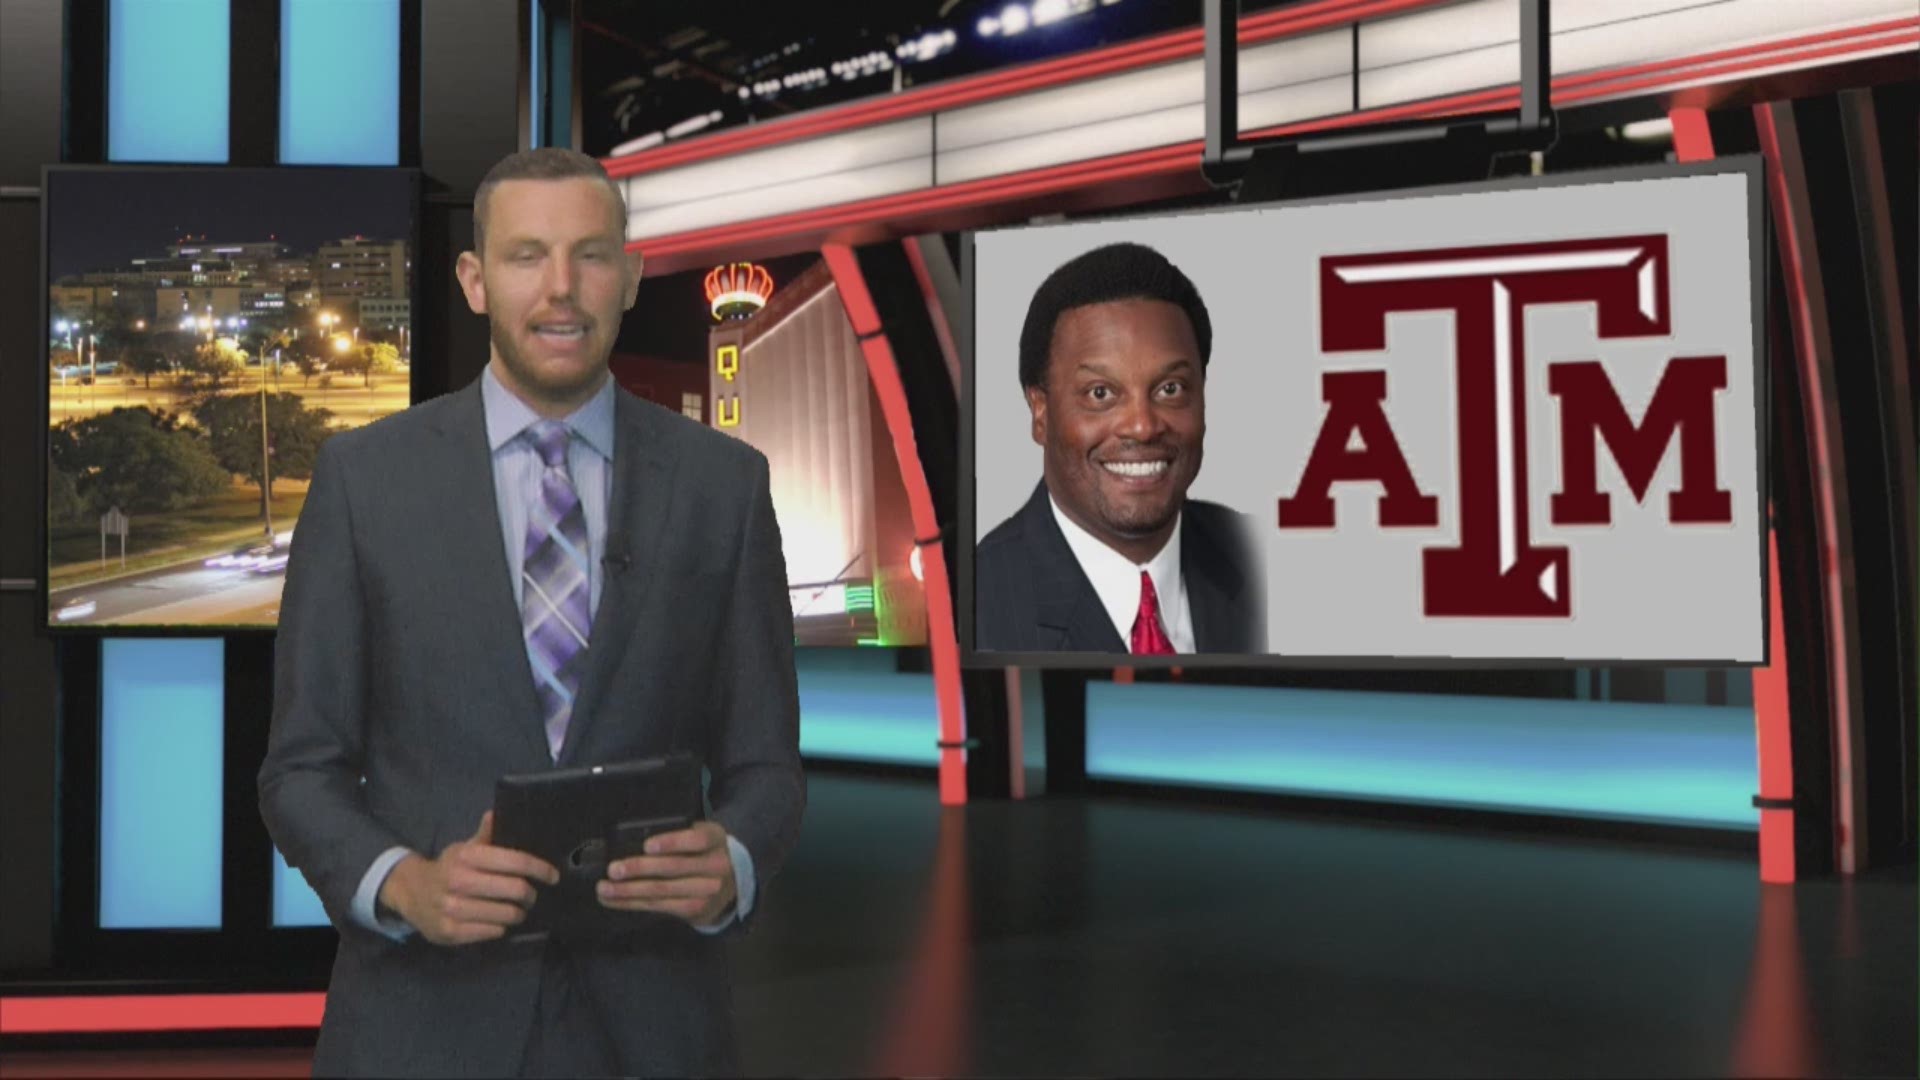 Kevin Sumlin oversaw some of the greatest moments in Aggie history during his six years in Aggieland, but ultimately, it wasn't enough to save his job.